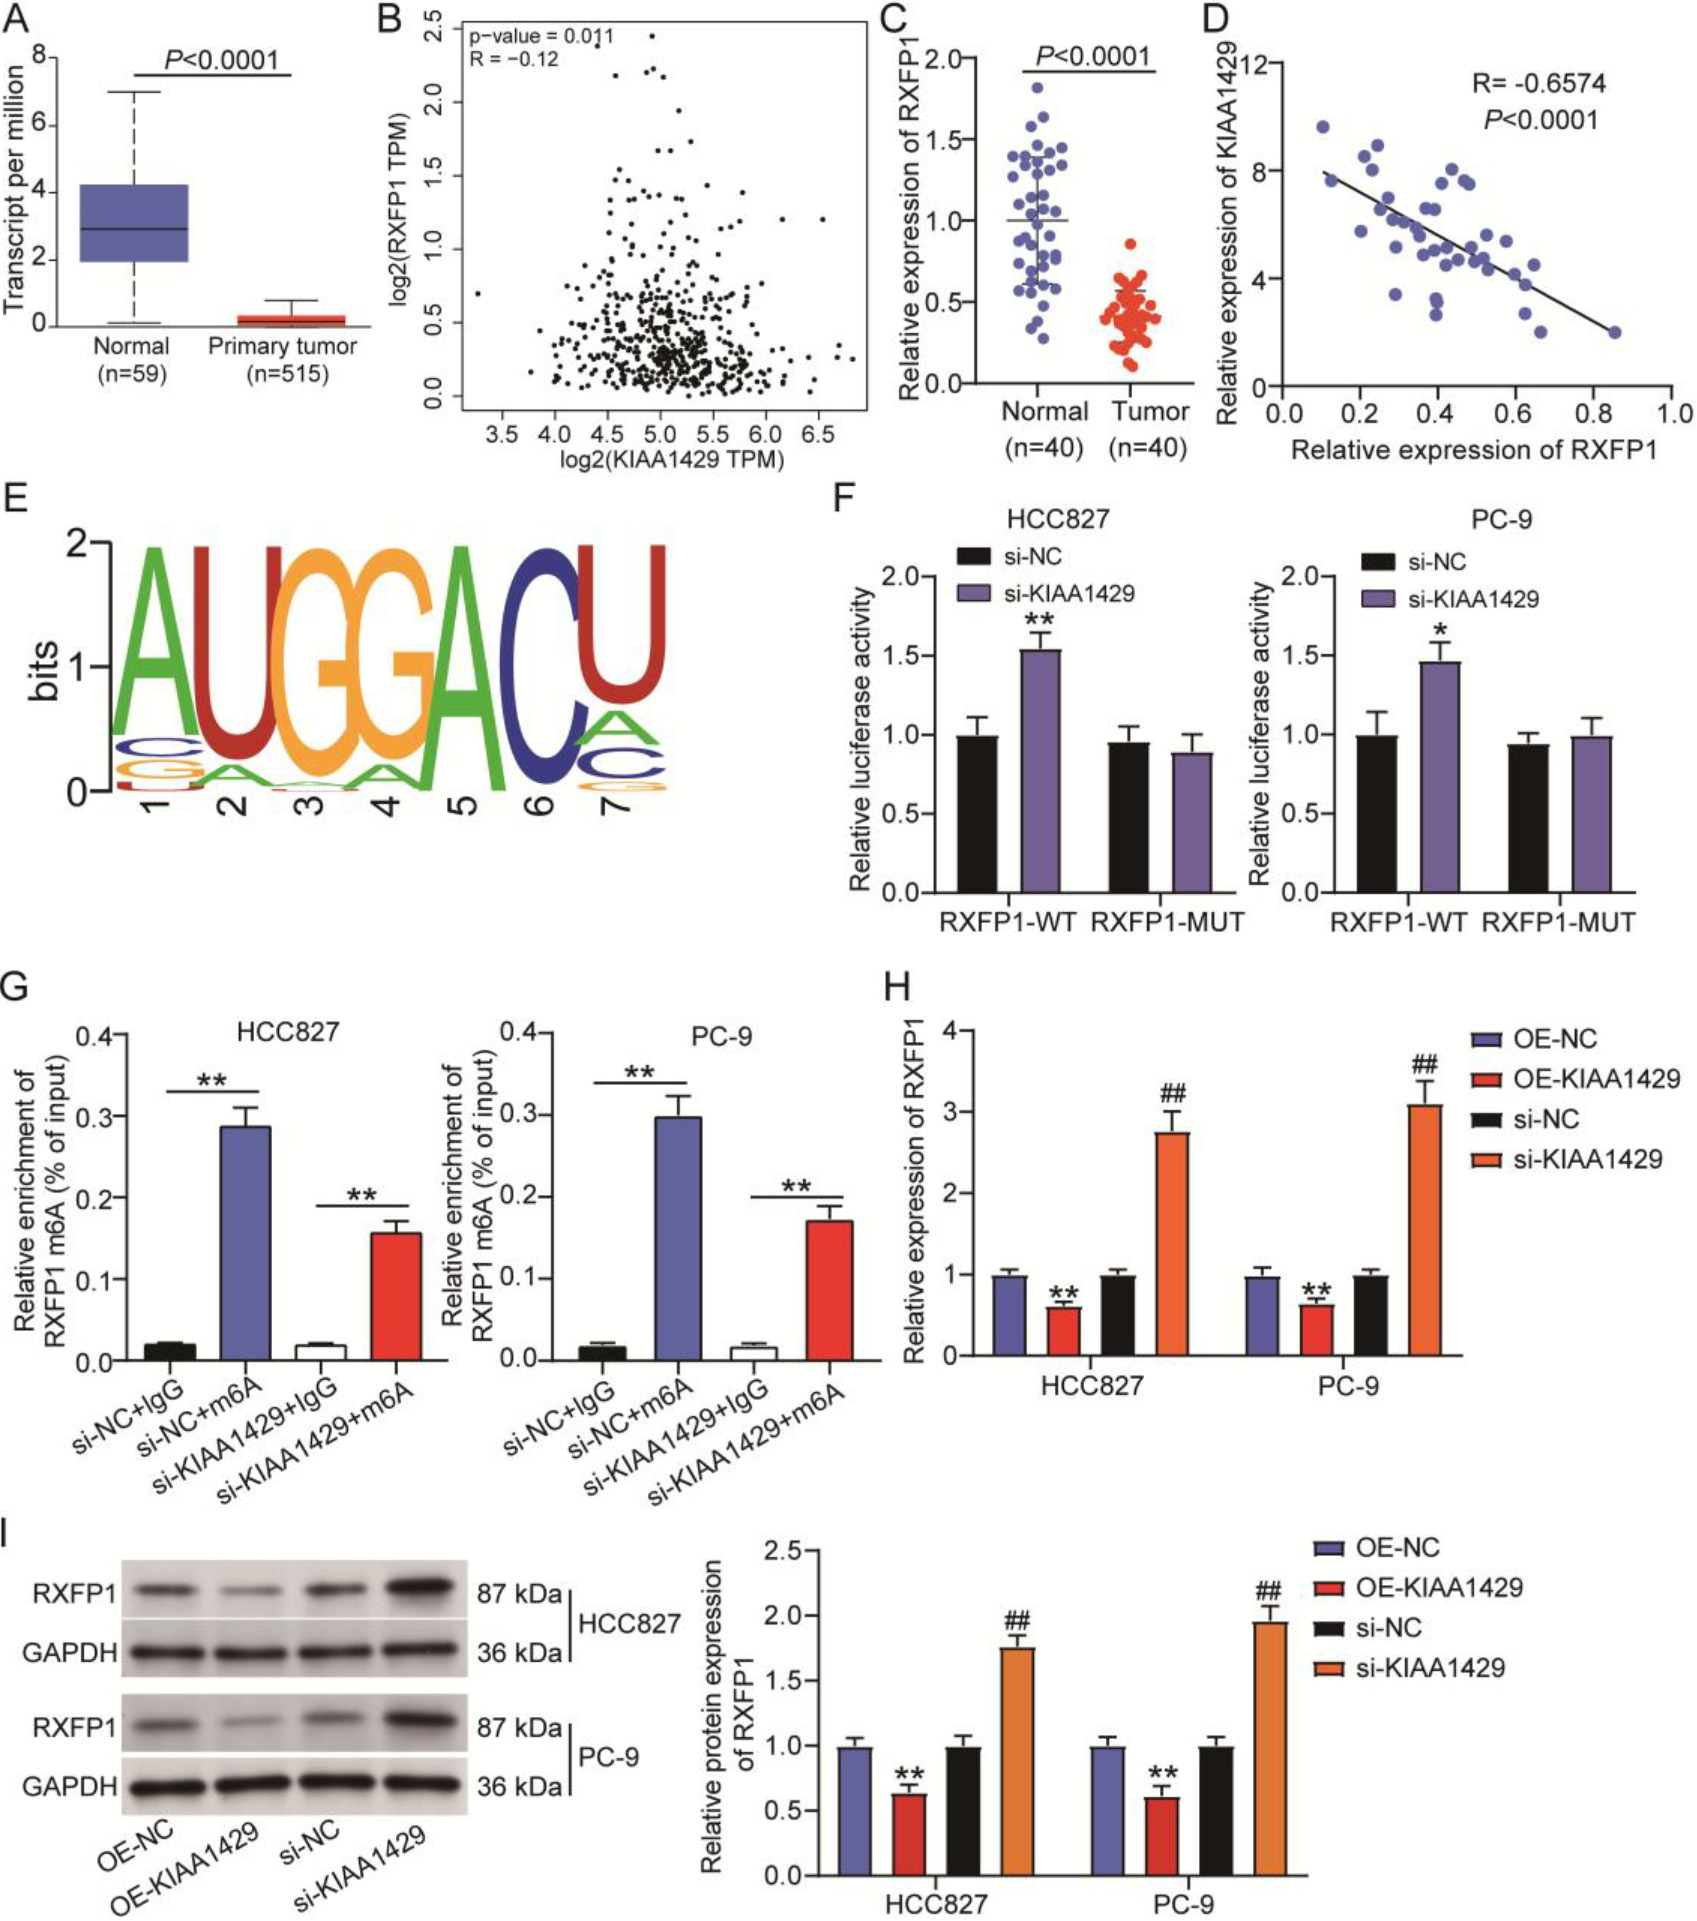 KIAA1429-mediated N6-methyladenosine (m6A) modification of relaxin family peptide receptor 1 (RXFP1) in non-small cell lung cancer (NSCLC) cells. (A) UALCAN was used to analyze RXFP1 expression in TCGA-lung adenocarcinoma samples. (B) GEPIA was used to analyze the correlation between KIAA1429 and RXFP1 expression in TCGA-lung adenocarcinoma samples. (C) Quantitative real-time polymerase chain reaction confirmed RXFP1 expression in 40 NSCLC and paired normal tissues collected in this study. A t-test was used to compare the significant difference in RXFP1 expression between normal and tumor tissues. (D) Pearson’s correlation analysis was used to determine the correlation between RXFP1 and KIAA1429 expression in 40 NSCLC samples. R=-0.6574 and P< 0.0001 indicated a significant negative correlation. (E) The m6A modification site of RXFP1 was predicted using RBMase v2.0. (F) Luciferase activity in NSCLC cells co-transfected with RXFP1-WT/RXFP1-MUT and si-NC/si-KIAA1429 was quantified using a luciferase assay. *P < 0.05, **P < 0.001 vs. RXFP1-WT + si-NC calculated using the analysis of variance confirmed the significant difference in luciferase activities among different groups. (G) MeRIP assay was used to detect the m6A levels of RXFP1 in NSCLC cells transfected with si-KIAA1429. **P < 0.001 calculated using the analysis of variance verified the significant difference in RXFP1 m6A levels among different groups. qRT-PCR (H) and western blotting (I) confirmed the levels of RXFP1 mRNA and protein in NSCLC cells transfected with OE-KIAA1429 or si-KIAA1429. **P < 0.001 vs. OE-NC calculated using a t-test showed the significant difference in RXFP1 expression between the OE-NC and OE-KIAA1429 groups. ##P < 0.001 vs. si-NC calculated using a t-test showed a significant difference in RXFP1 expression between the si-NC and si-KIAA1429 groups. Error bars represent the standard deviation.